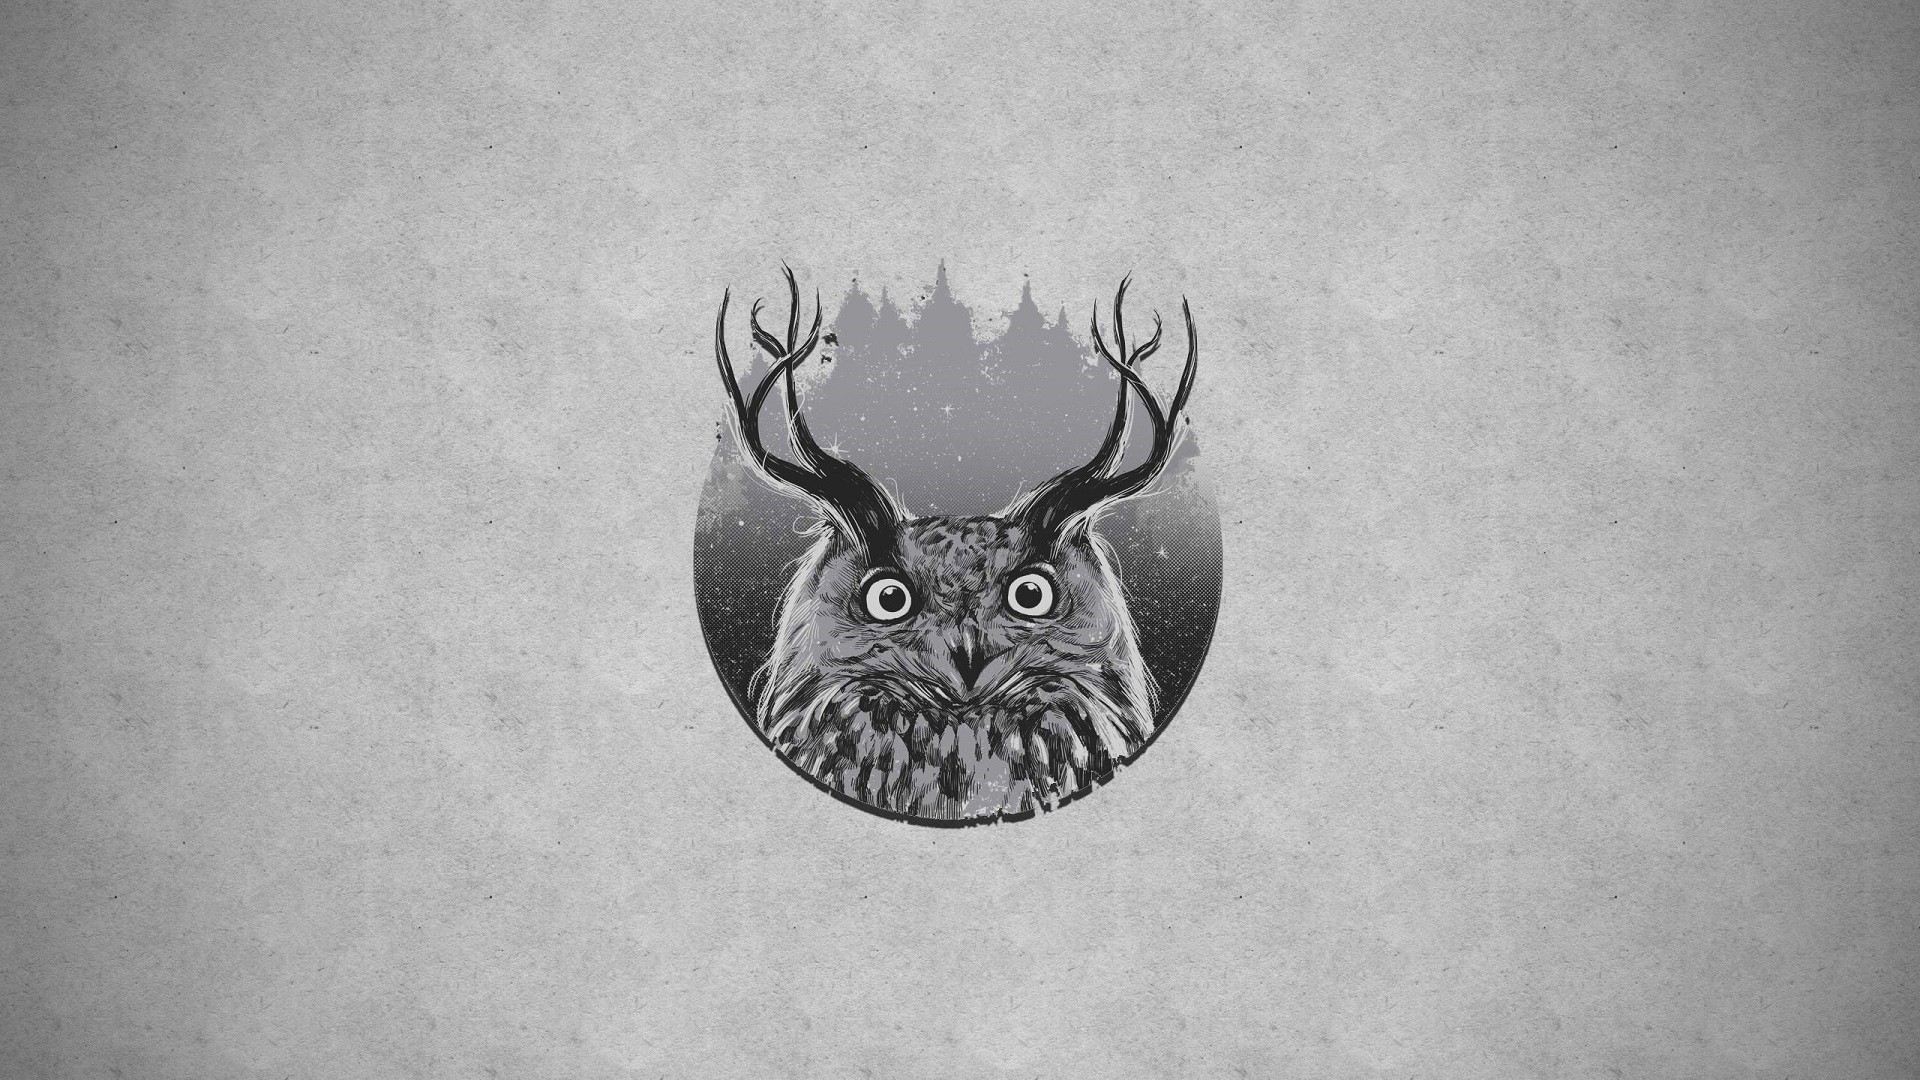 General 1920x1080 owl forest animals birds simple background artwork gray background gray